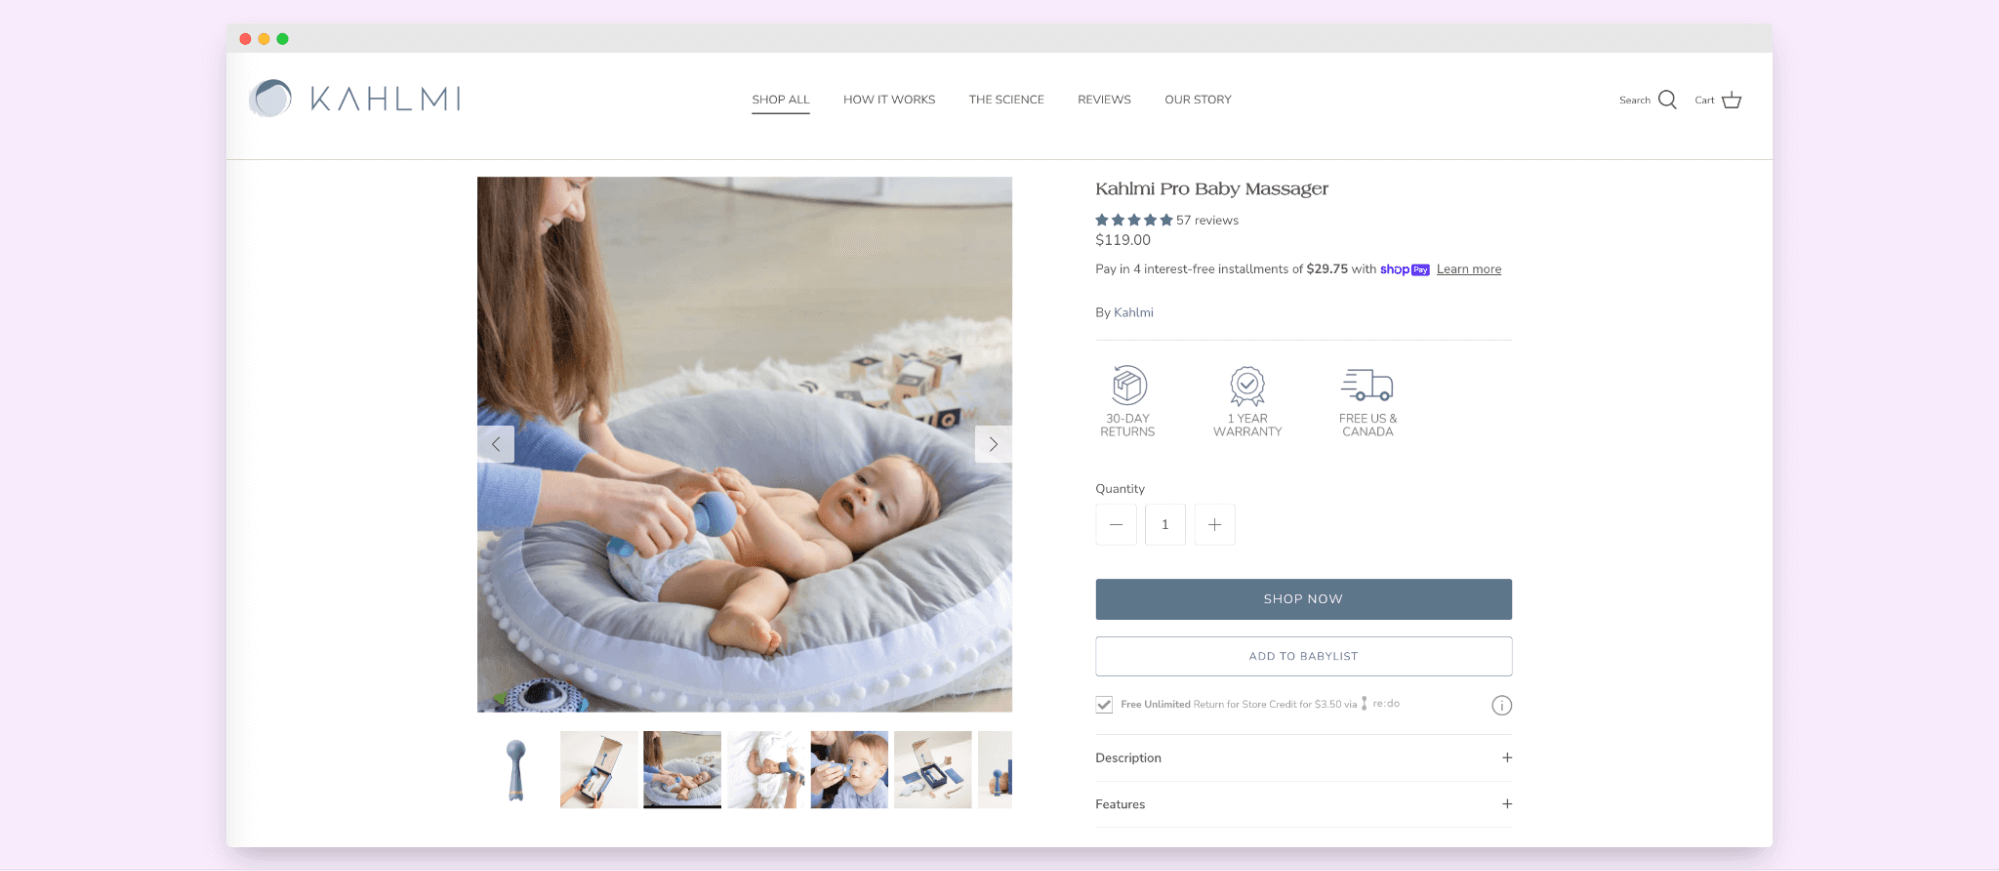 Shopify product page example optimized with Prodport.